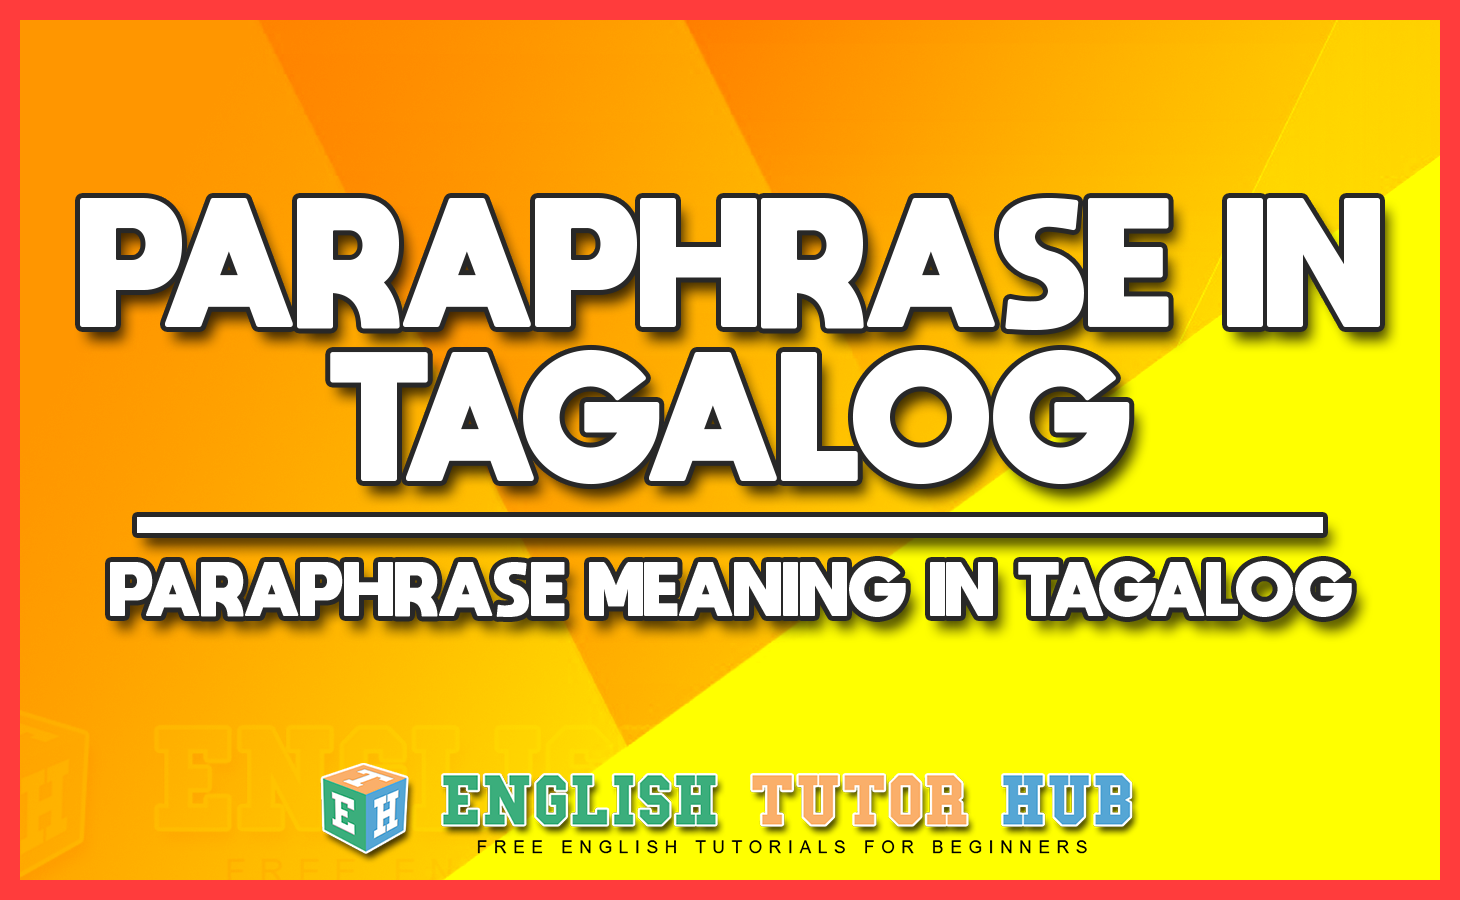 PARAPHRASE IN TAGALOG - PARAPHRASE MEANING IN TAGALOG